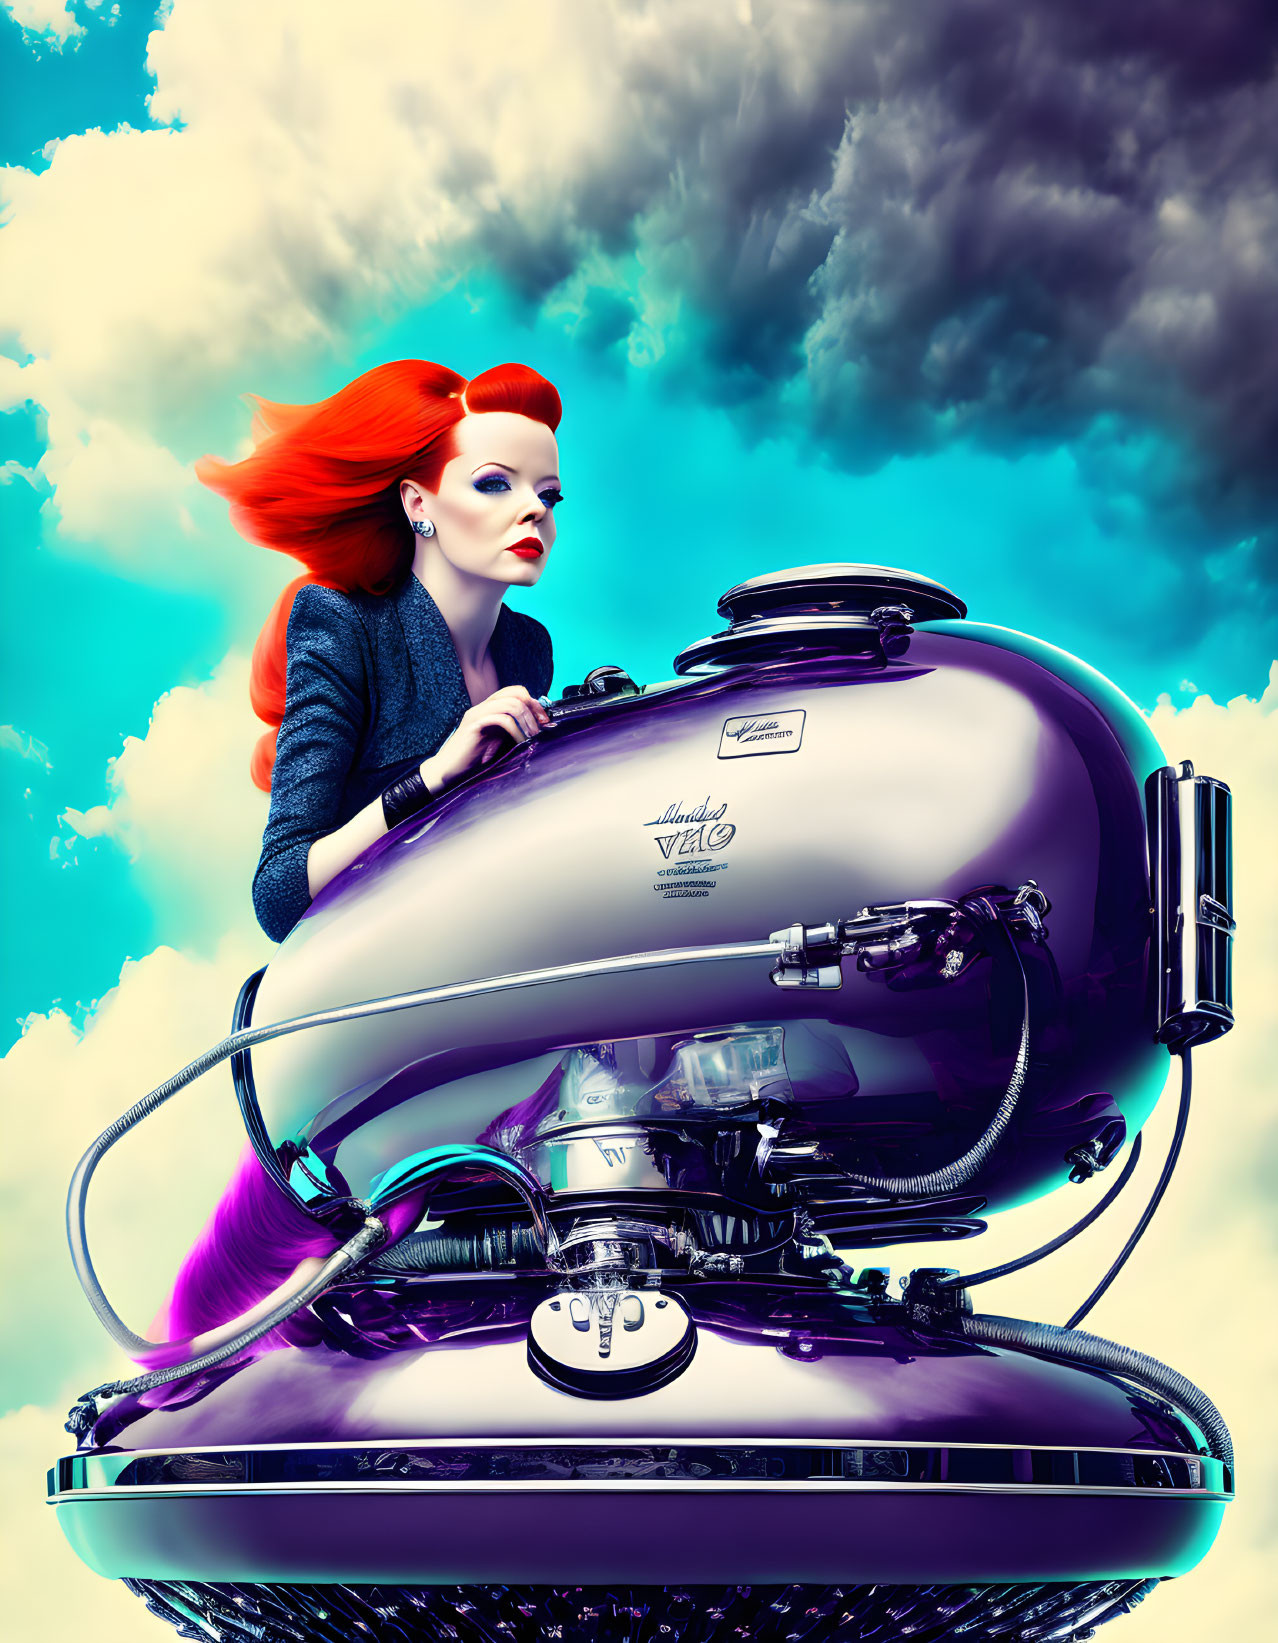 Vibrant red-haired woman on futuristic chrome motorcycle under dramatic sky